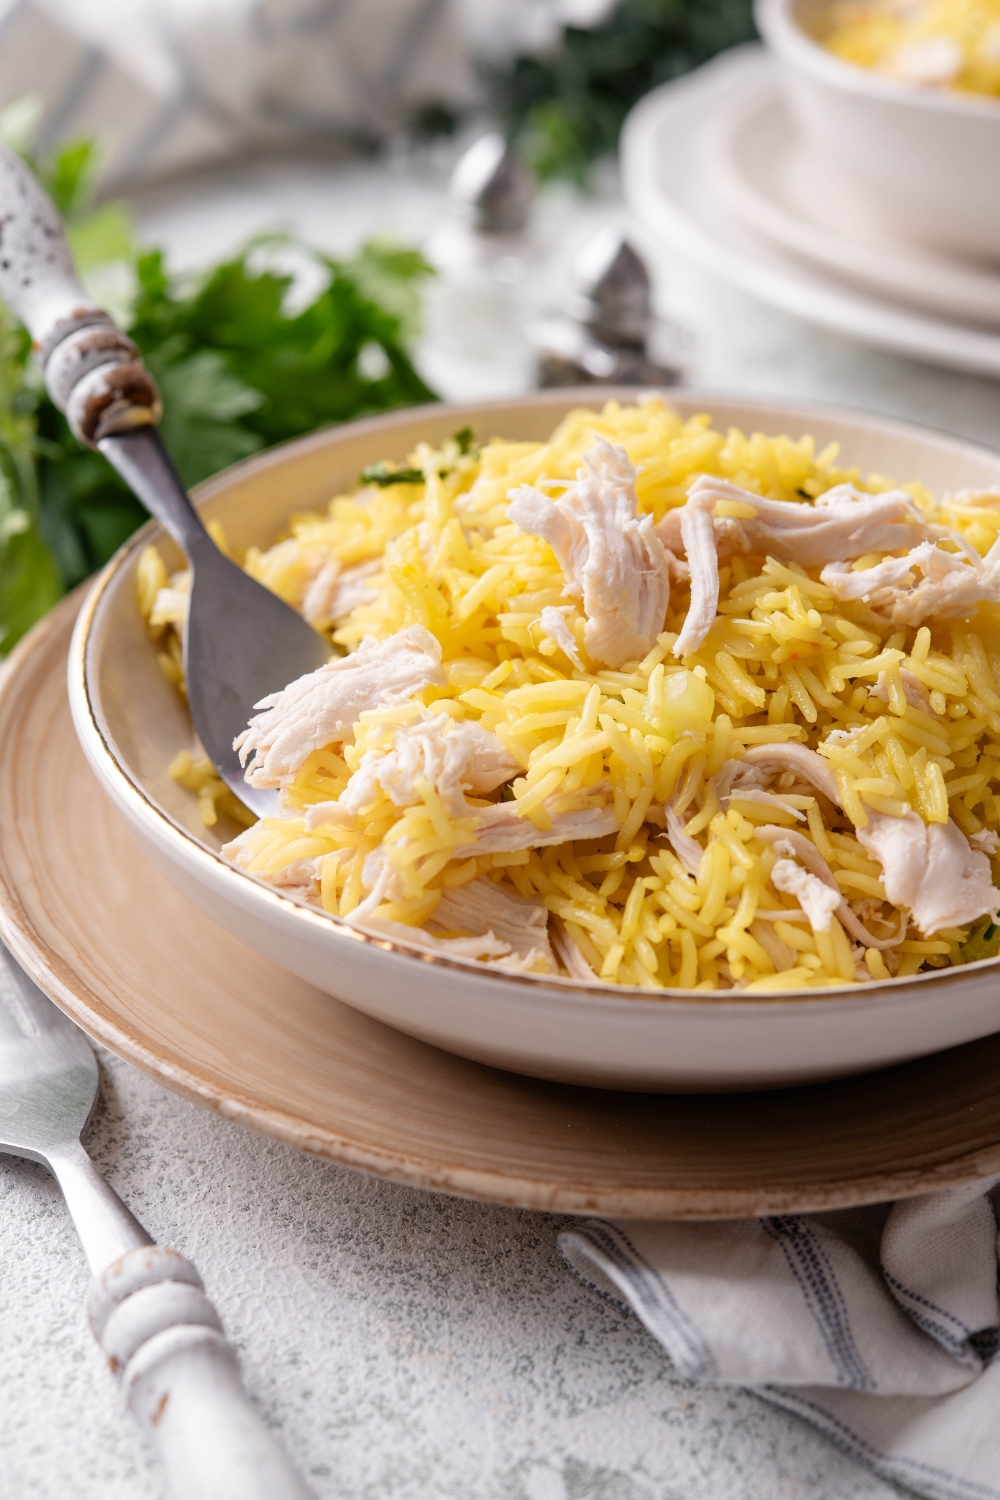 A bowl of yellow rice and shredded chicken mixed together and a fork is grabbing a scoop of rice and chicken from the bowl.